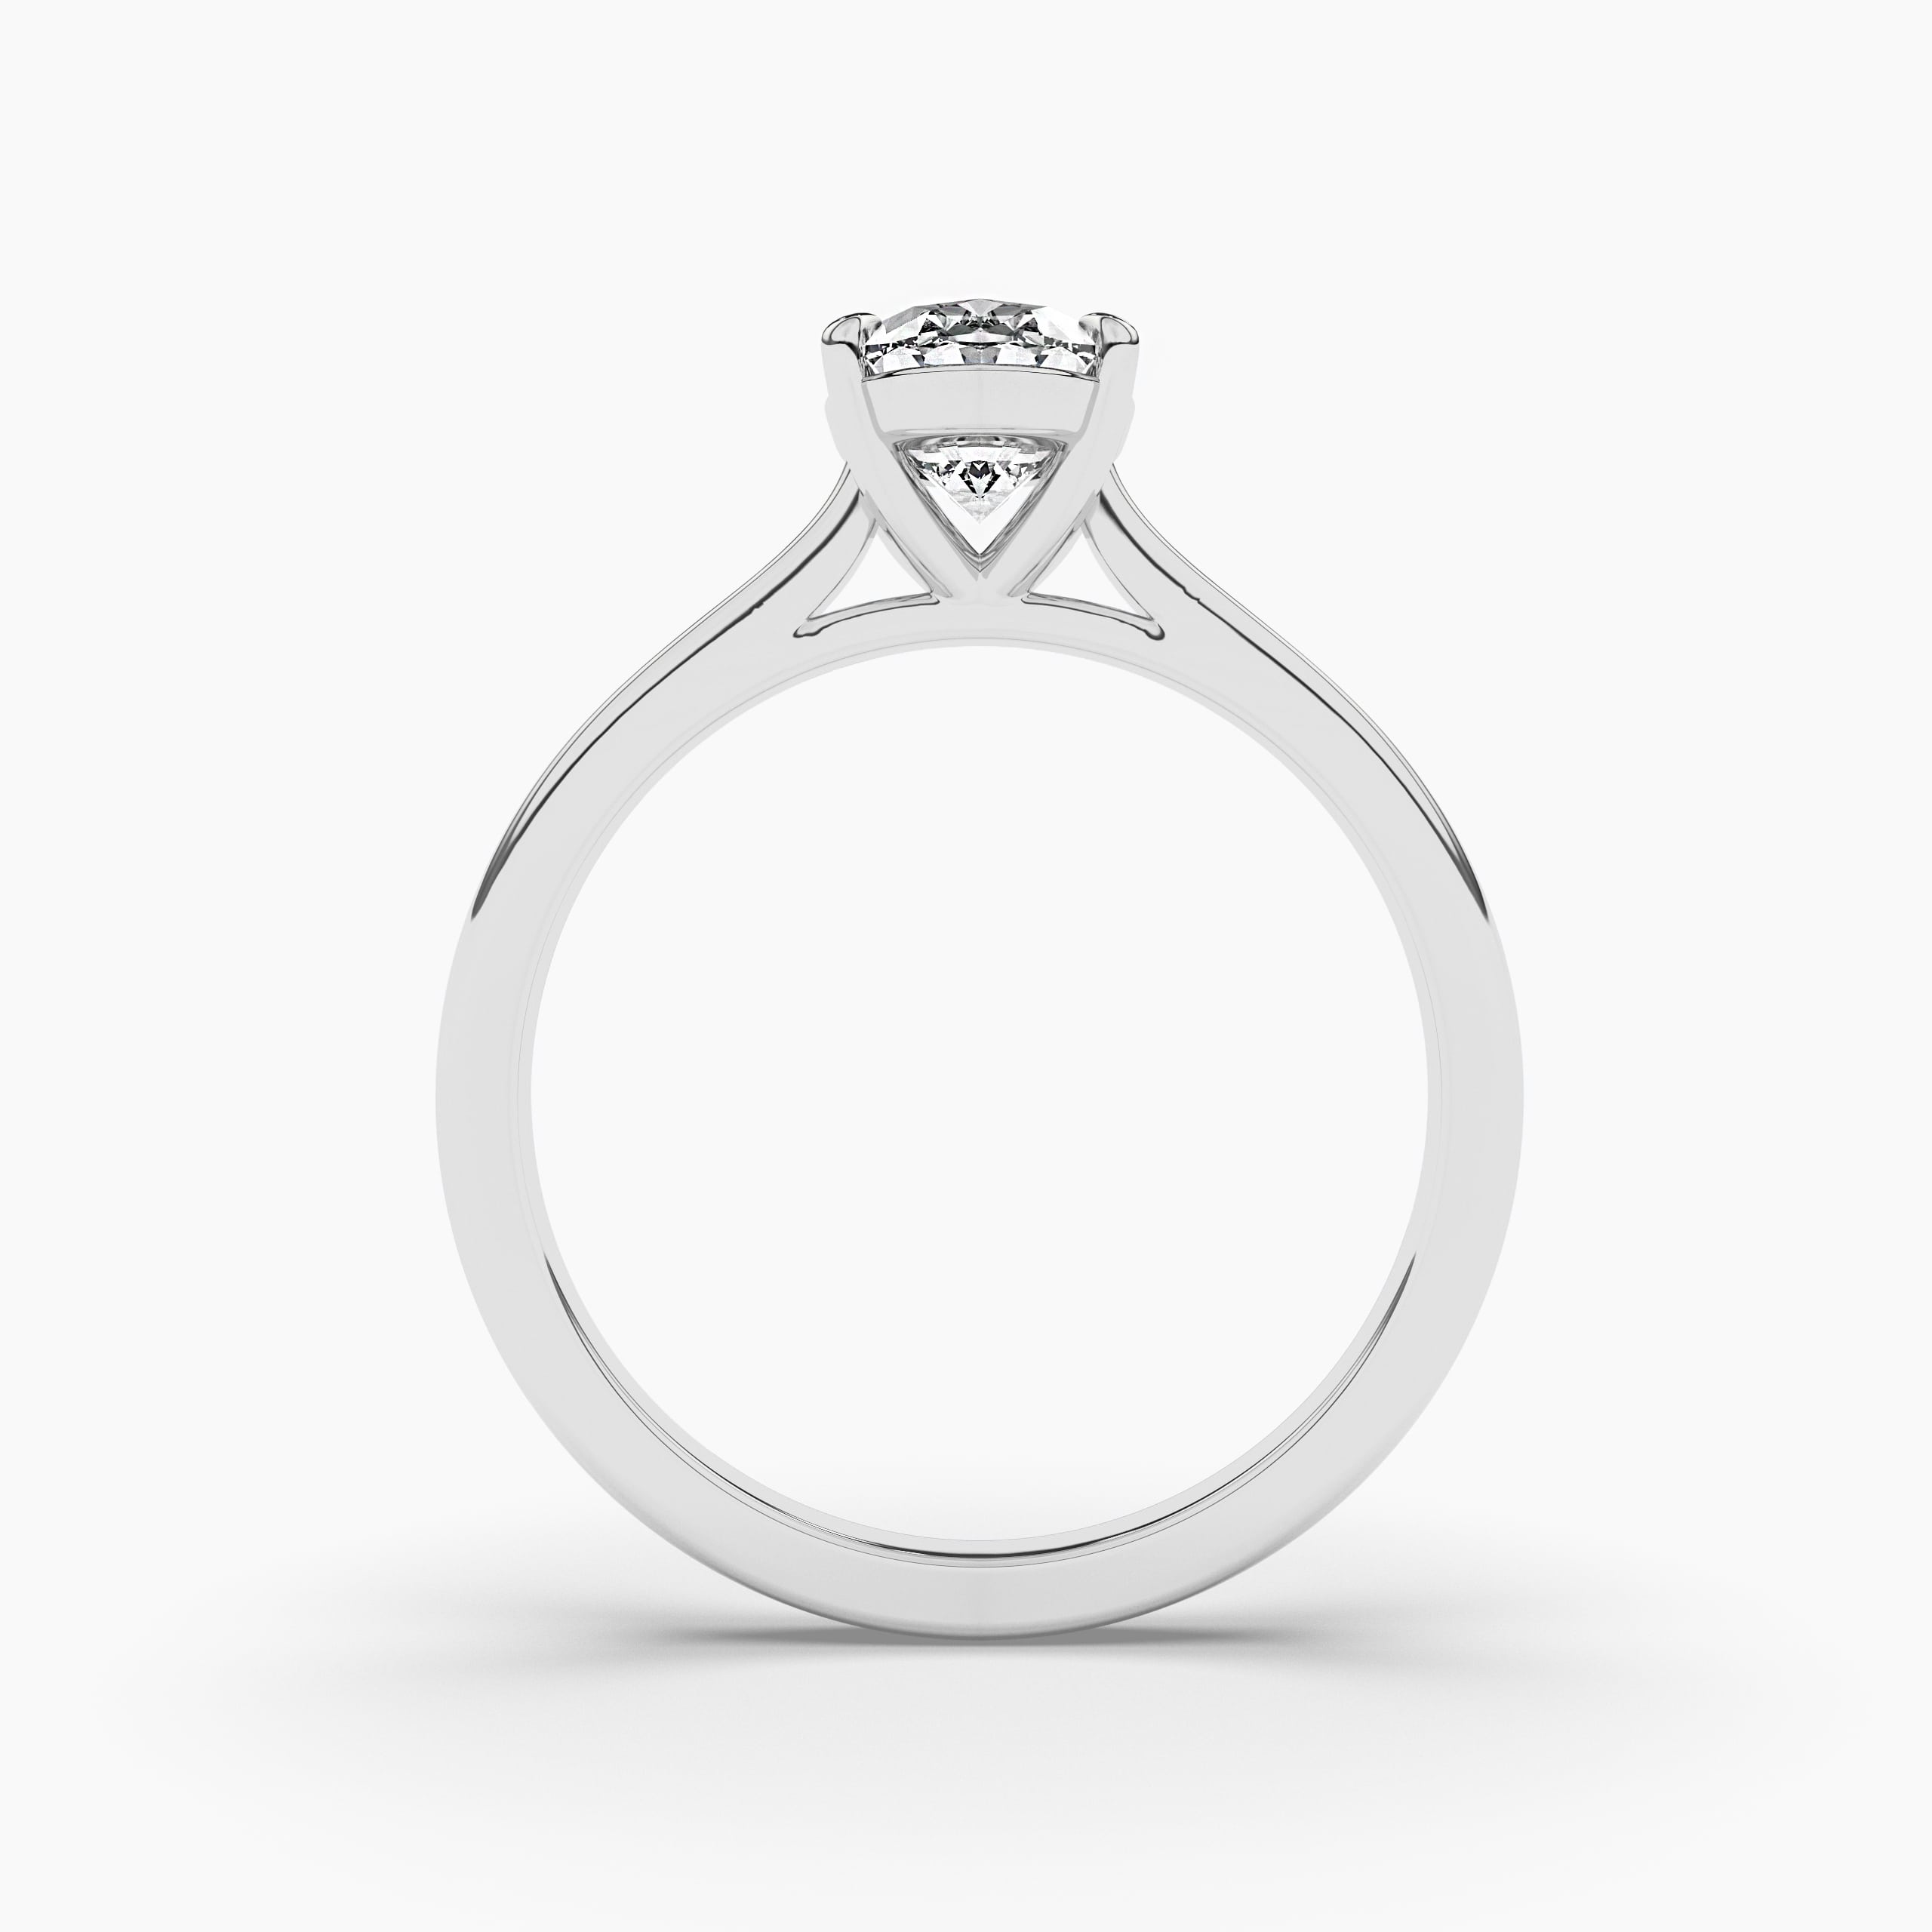 OVAL CUT SOLITAIRE MOISSANITE ENGAGEMENT RING